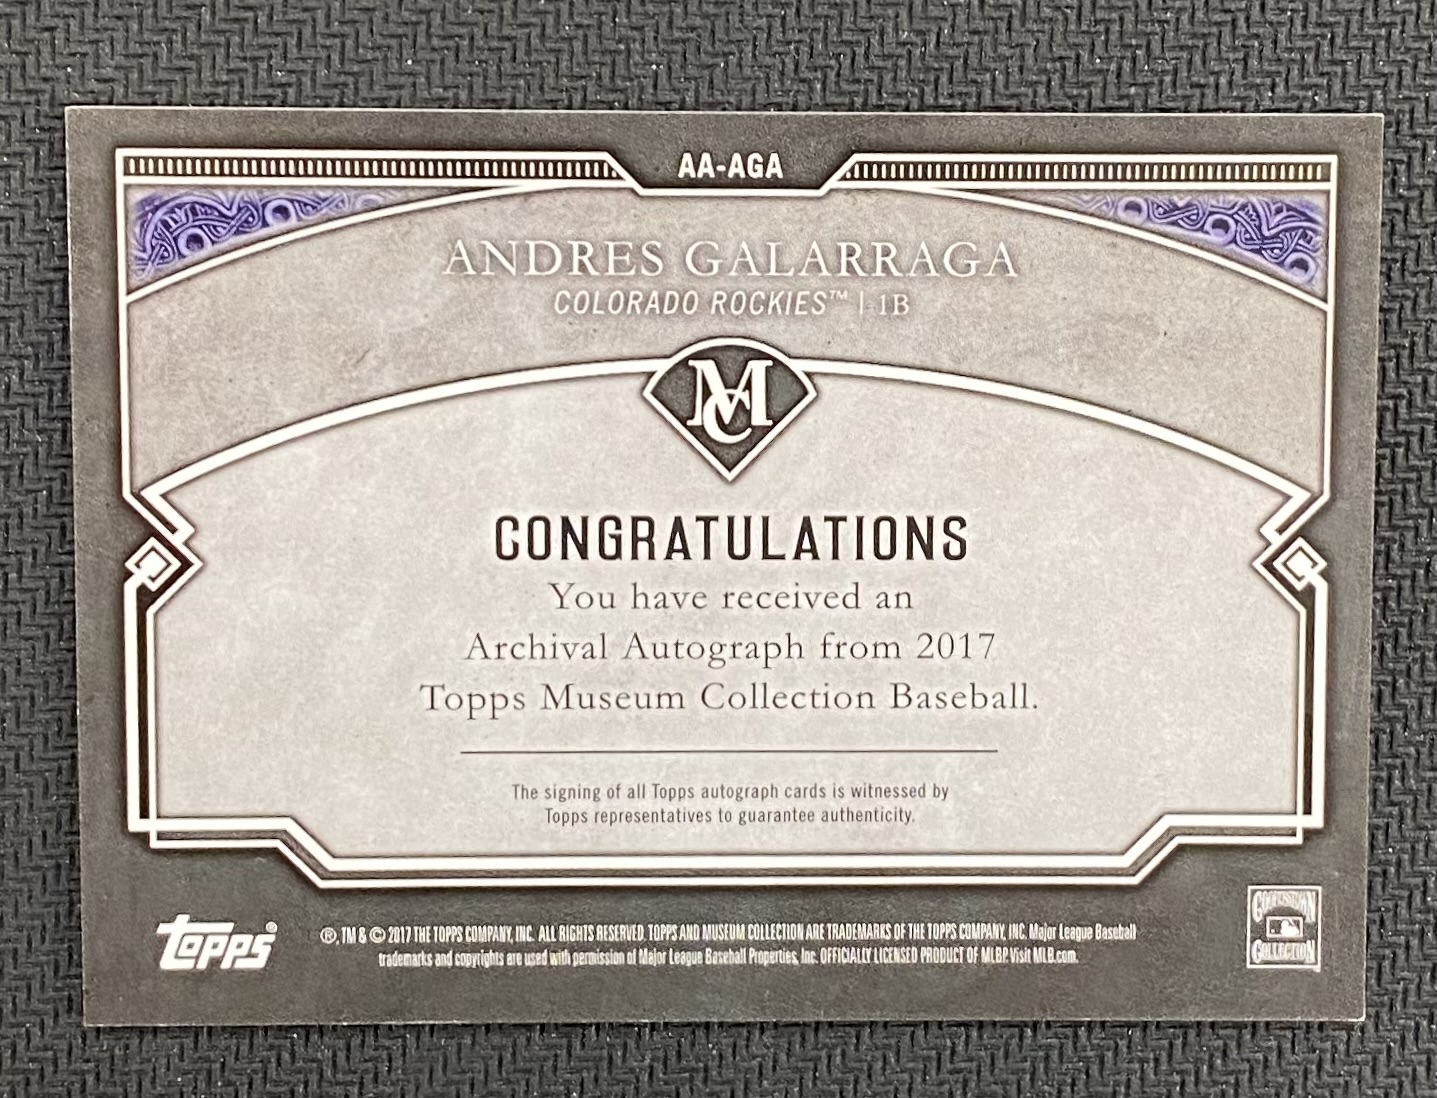 2017 Topps Museum Collection Archival Autographs Gold #AAAGA Andres Galarraga back image